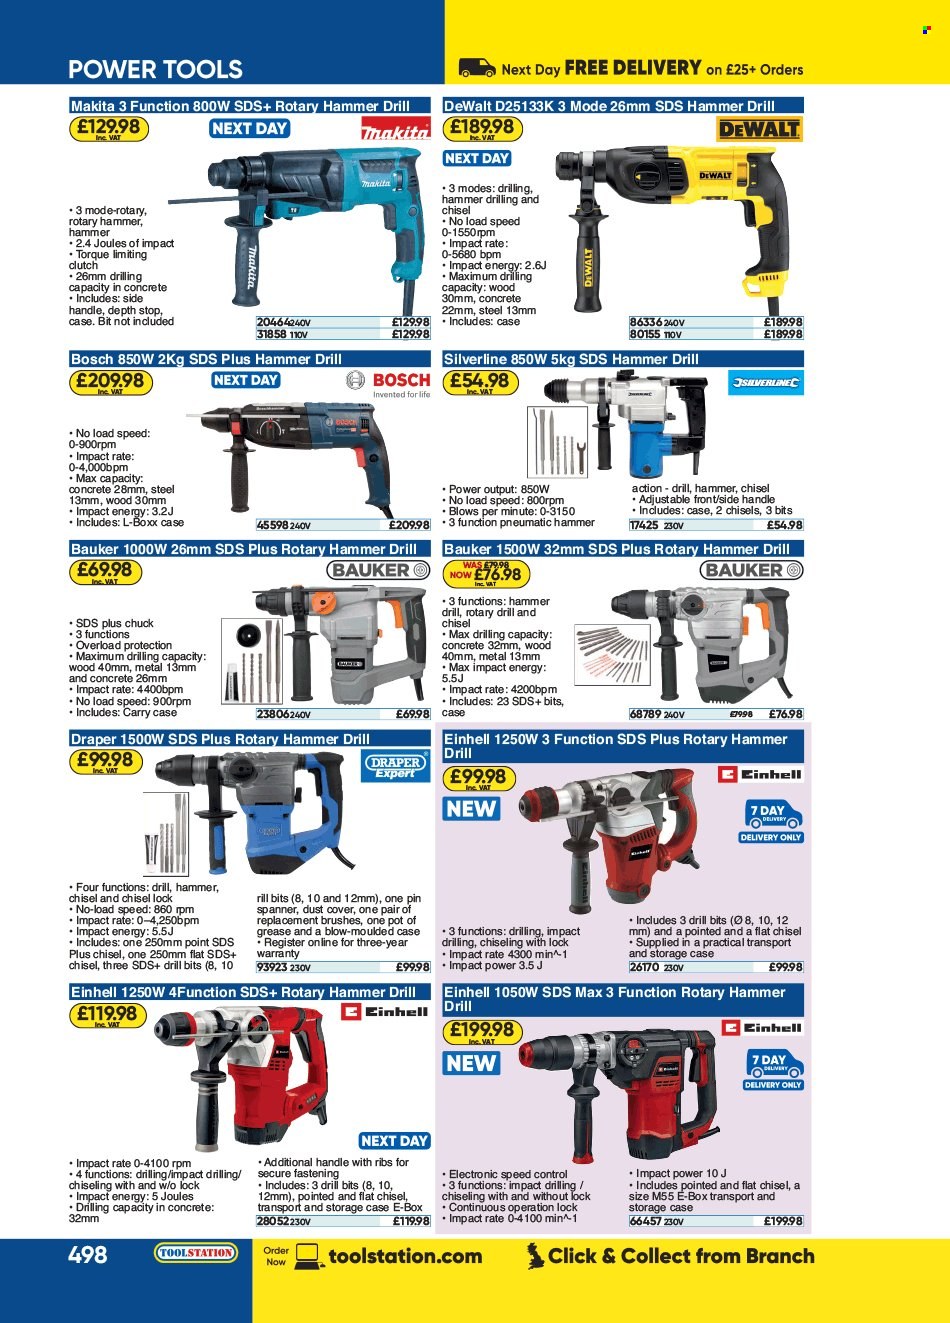 thumbnail - Toolstation offer  - Sales products - Bosch, DeWALT, power tools, Makita, spanner, pot. Page 498.